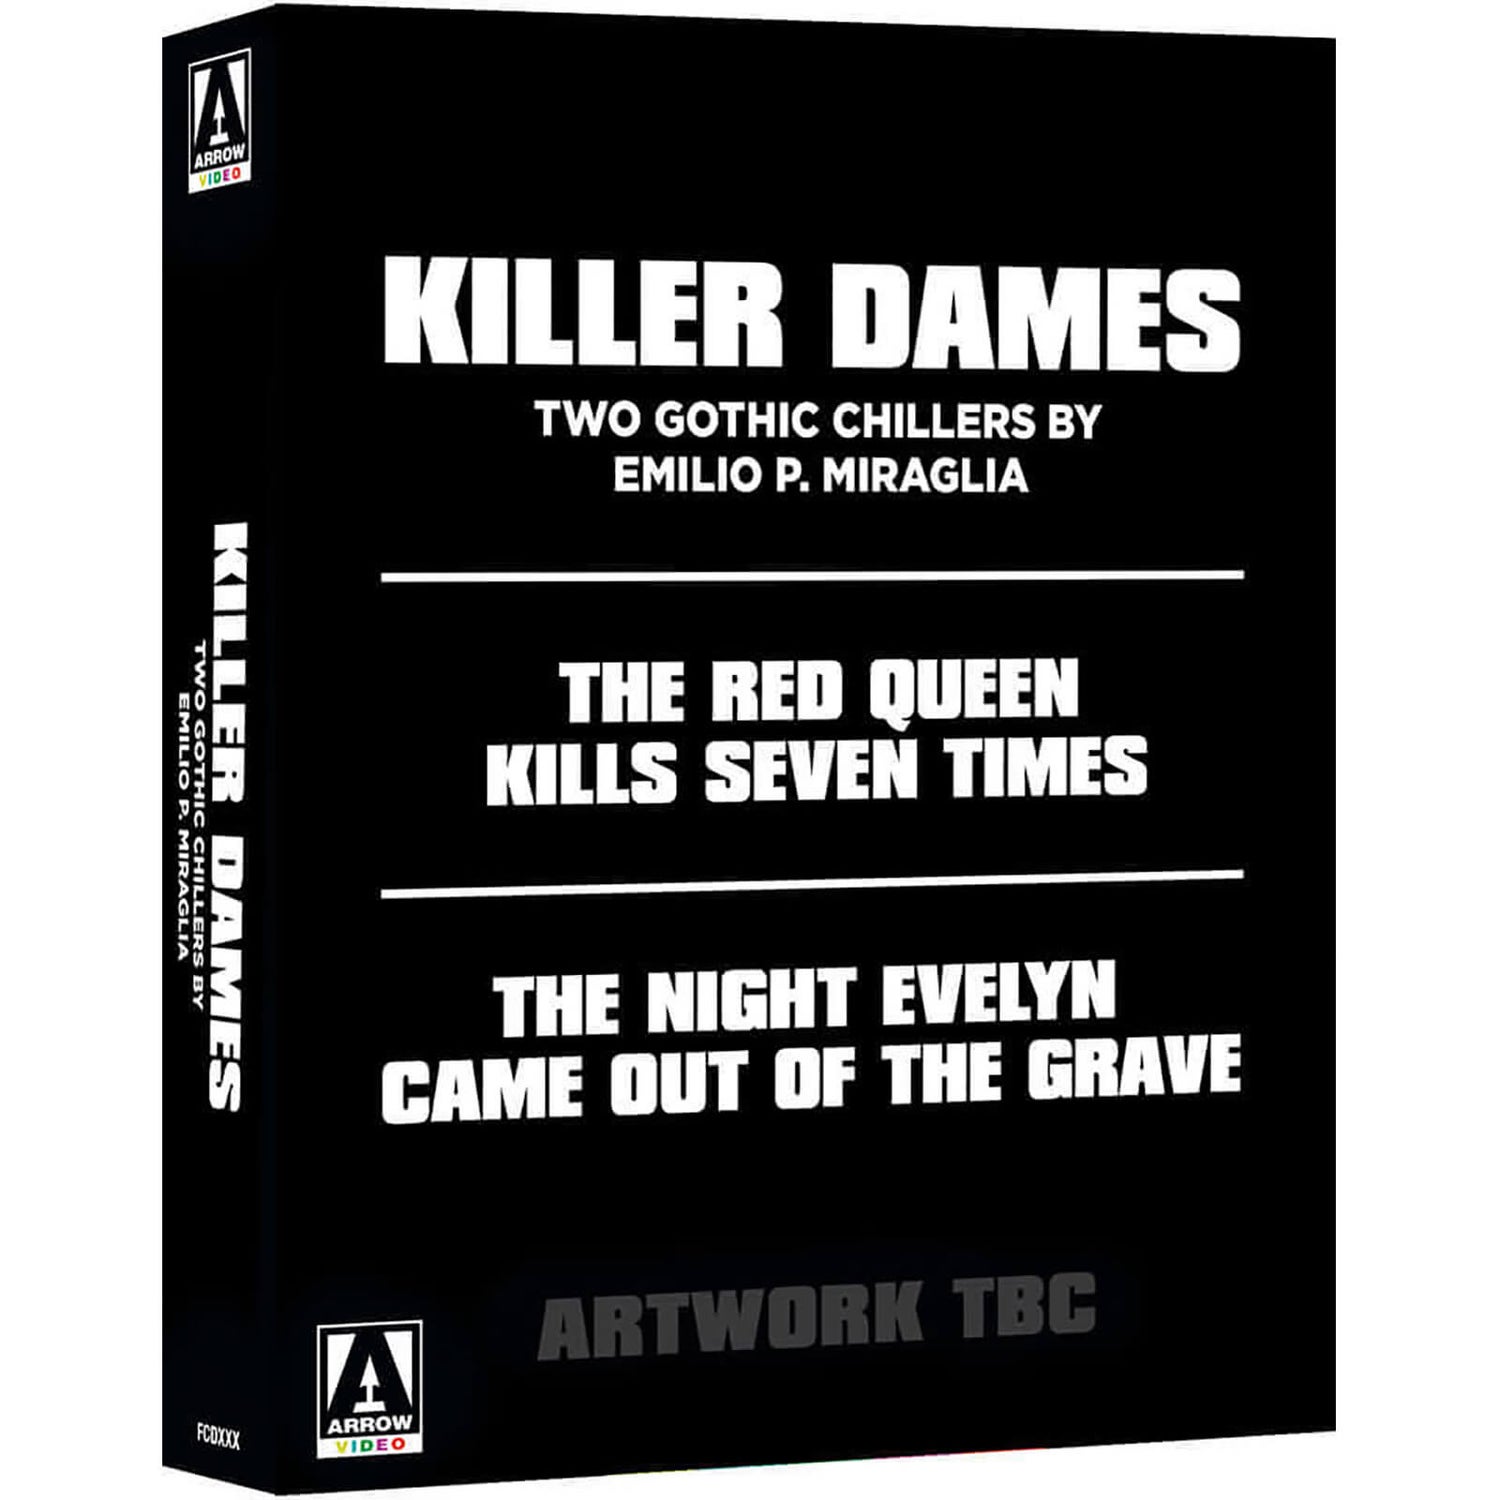 Killer Dames: Two Gothic Chillers - Dual Format (Includes DVD)